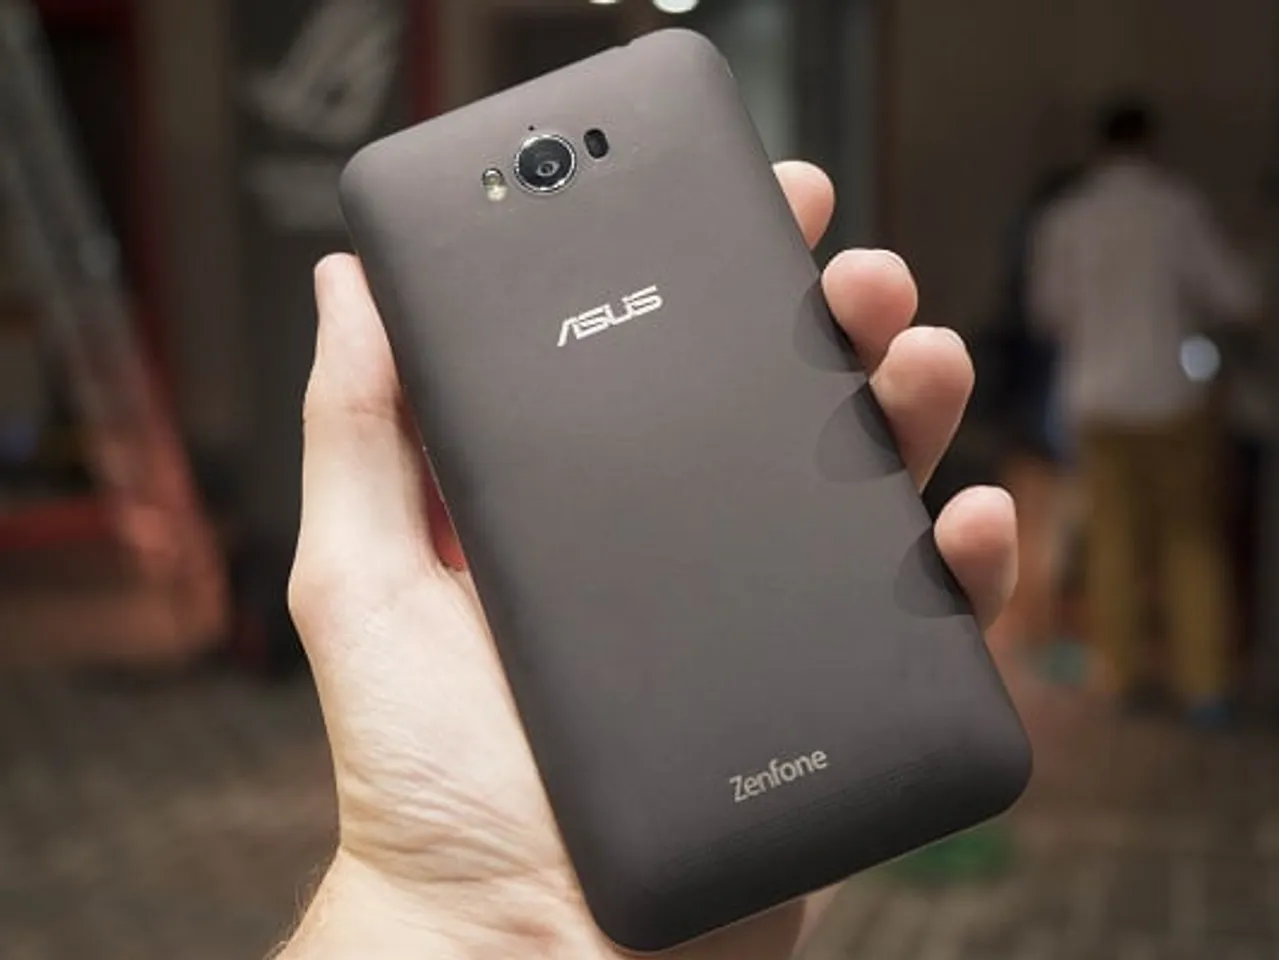 Asus Zenfone Max Is Now Available At Exciting New Price